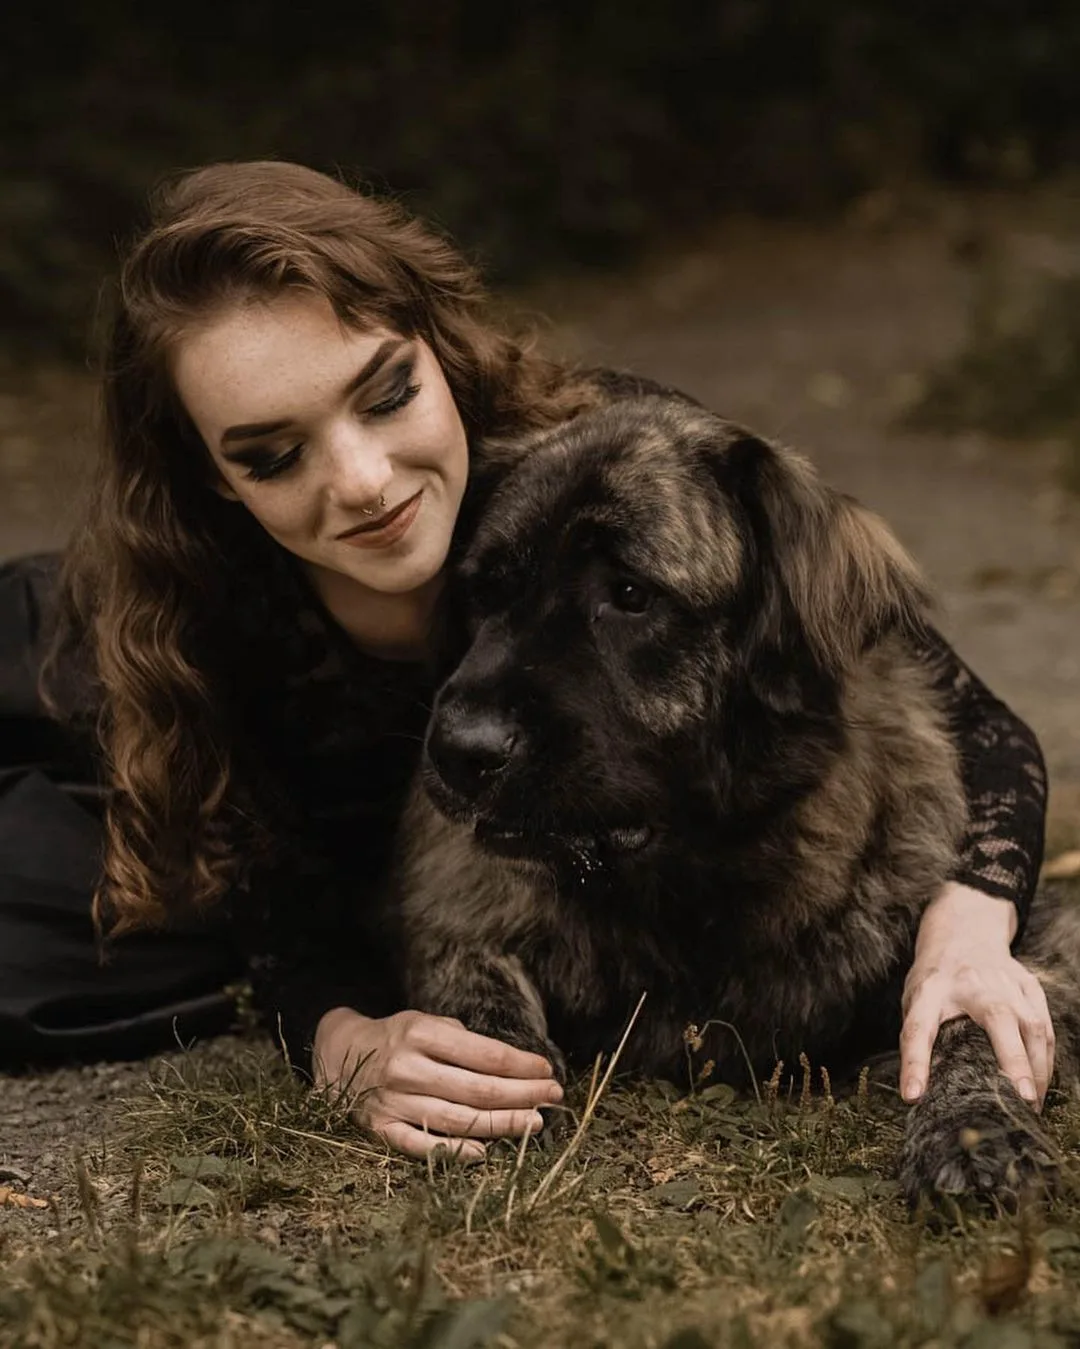 Brindle Anatolian Shepherd in the arms of a woman